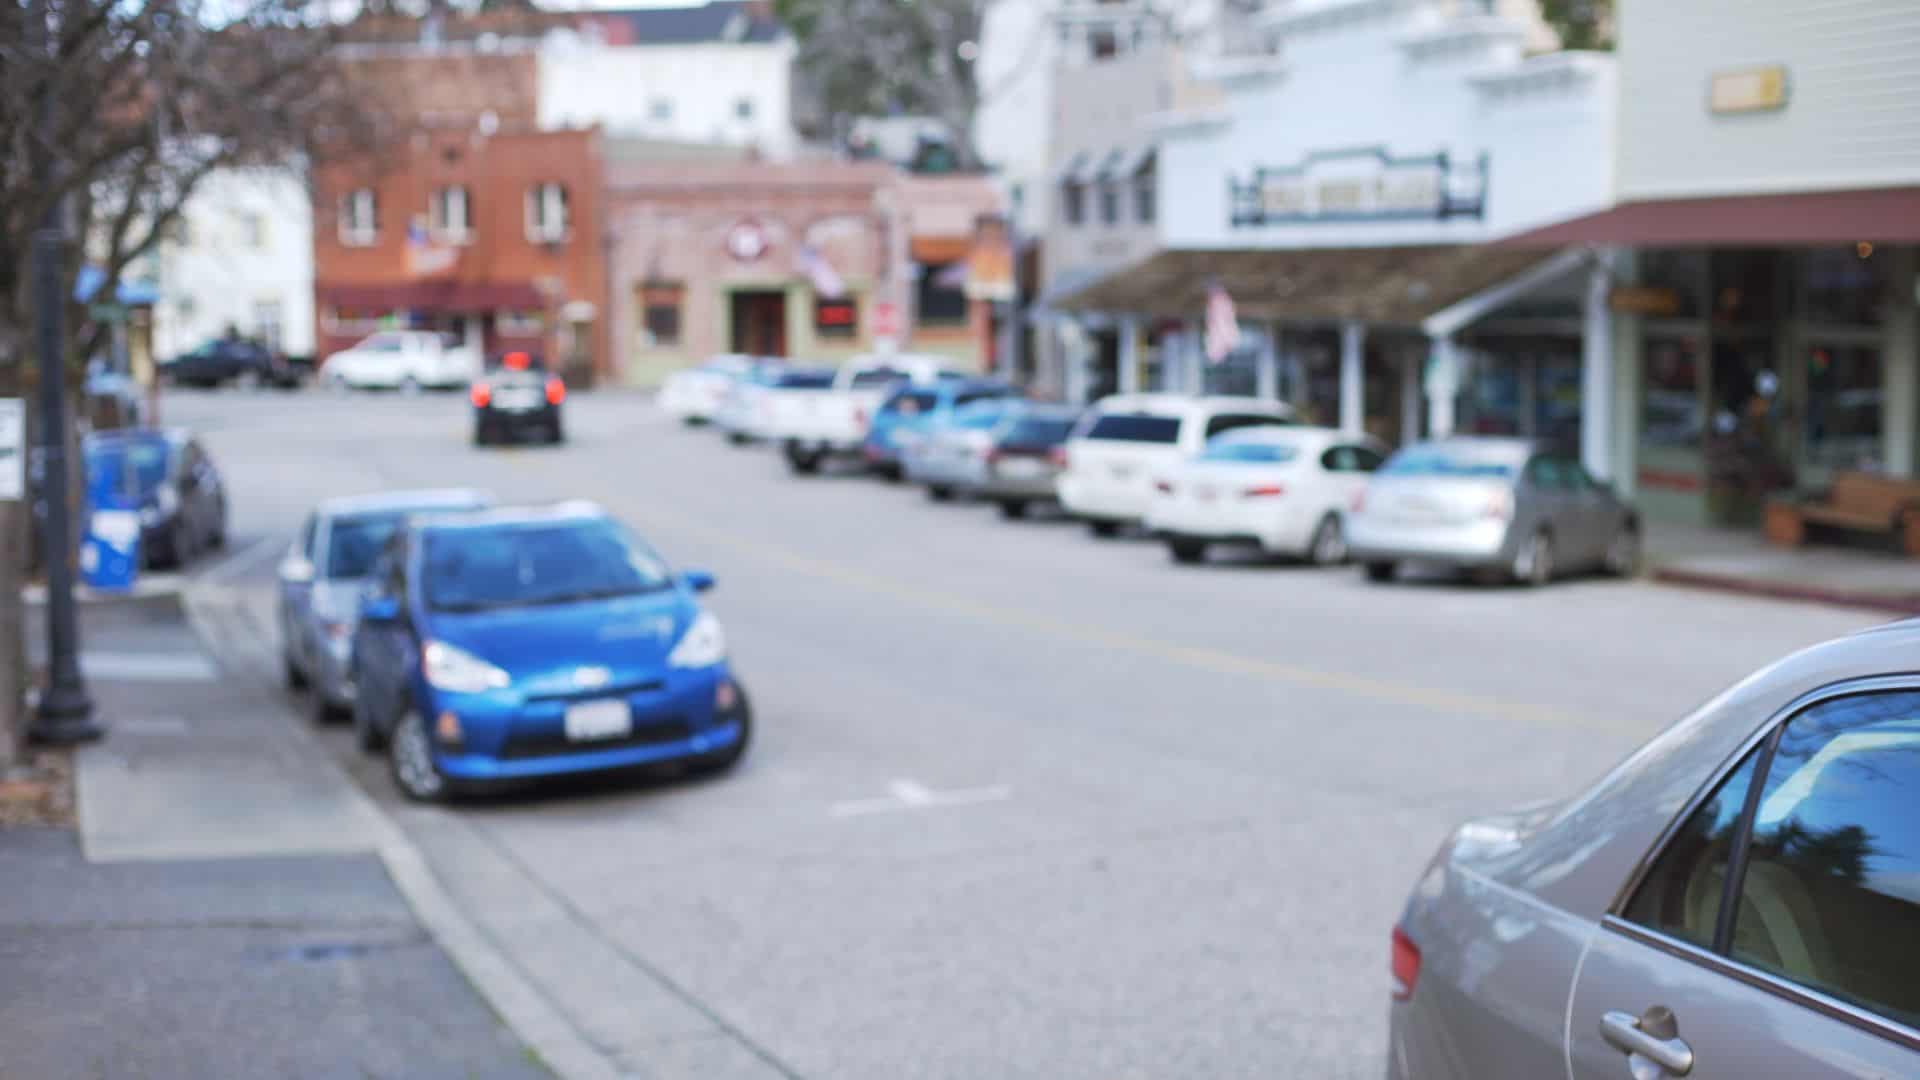 Revitalizing Small Towns: Harnessing Smart Parking Technology